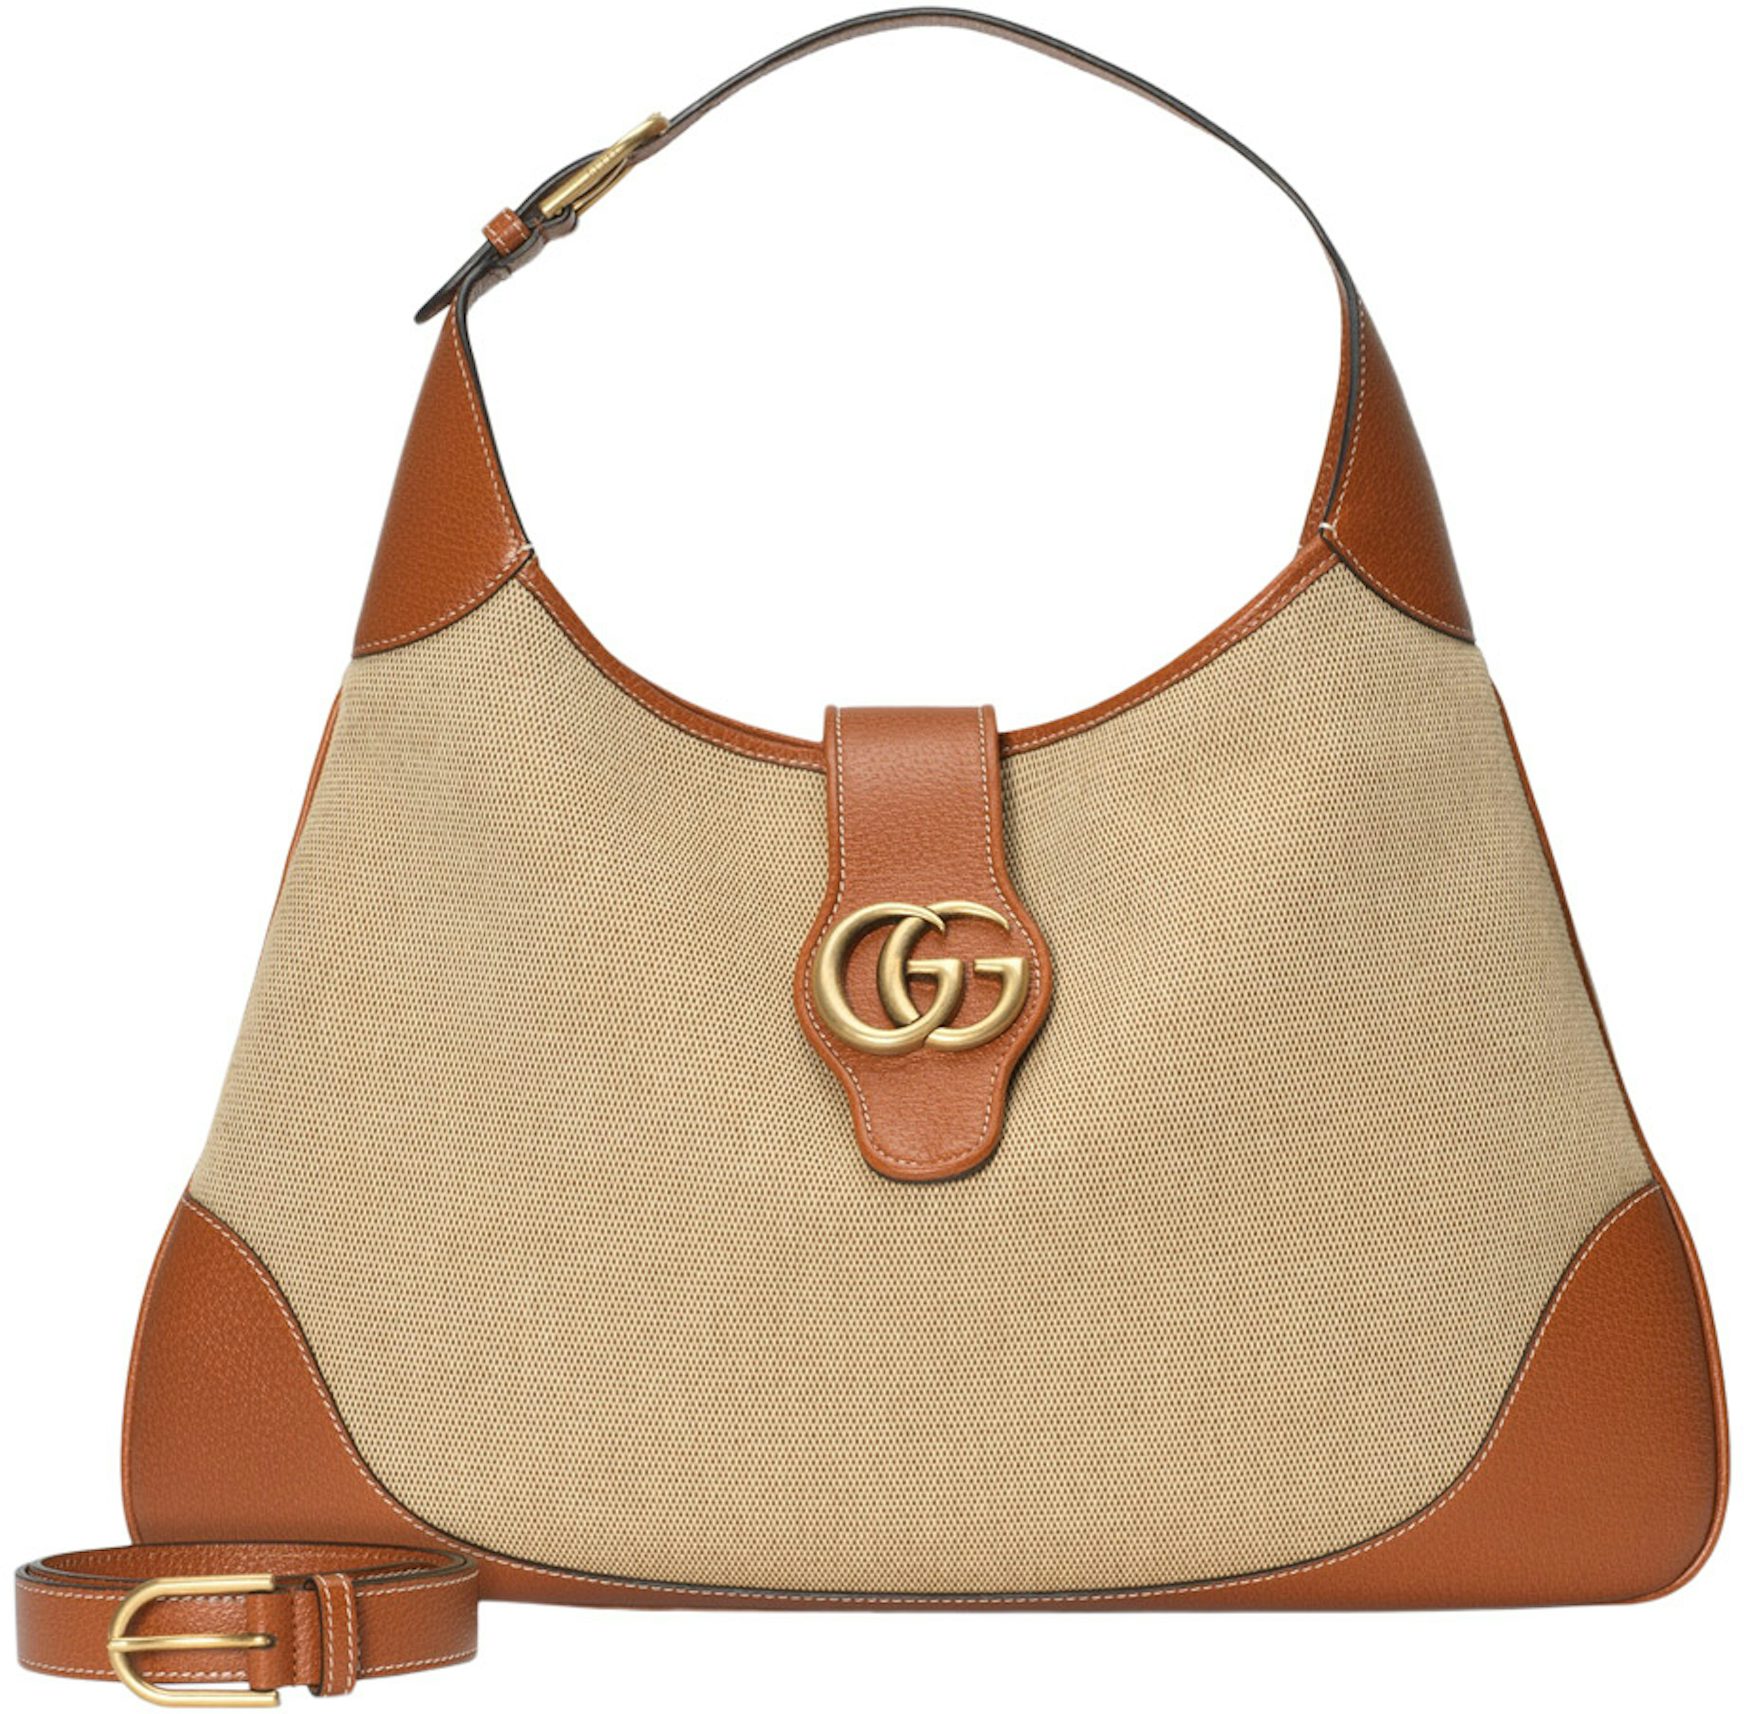 GUCCI Beige Tan Leather trim Canvas as is - well loved Tote Purse